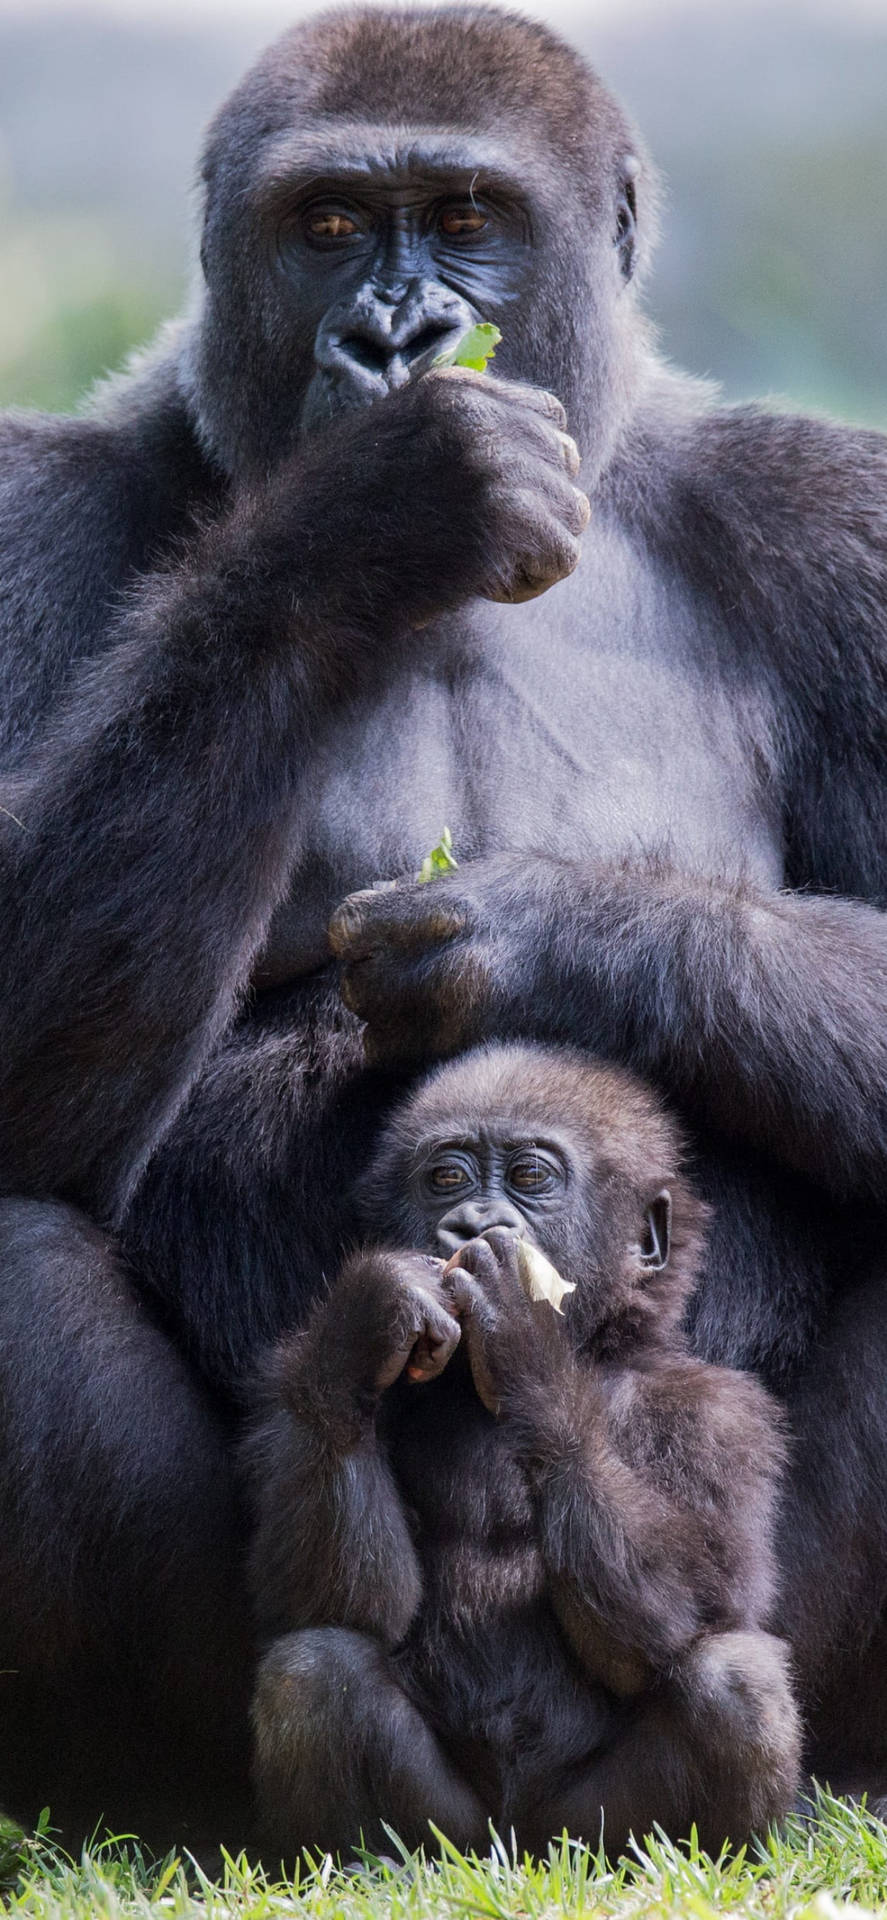 Eating Mother And Infant Gorilla Iphone Wallpaper